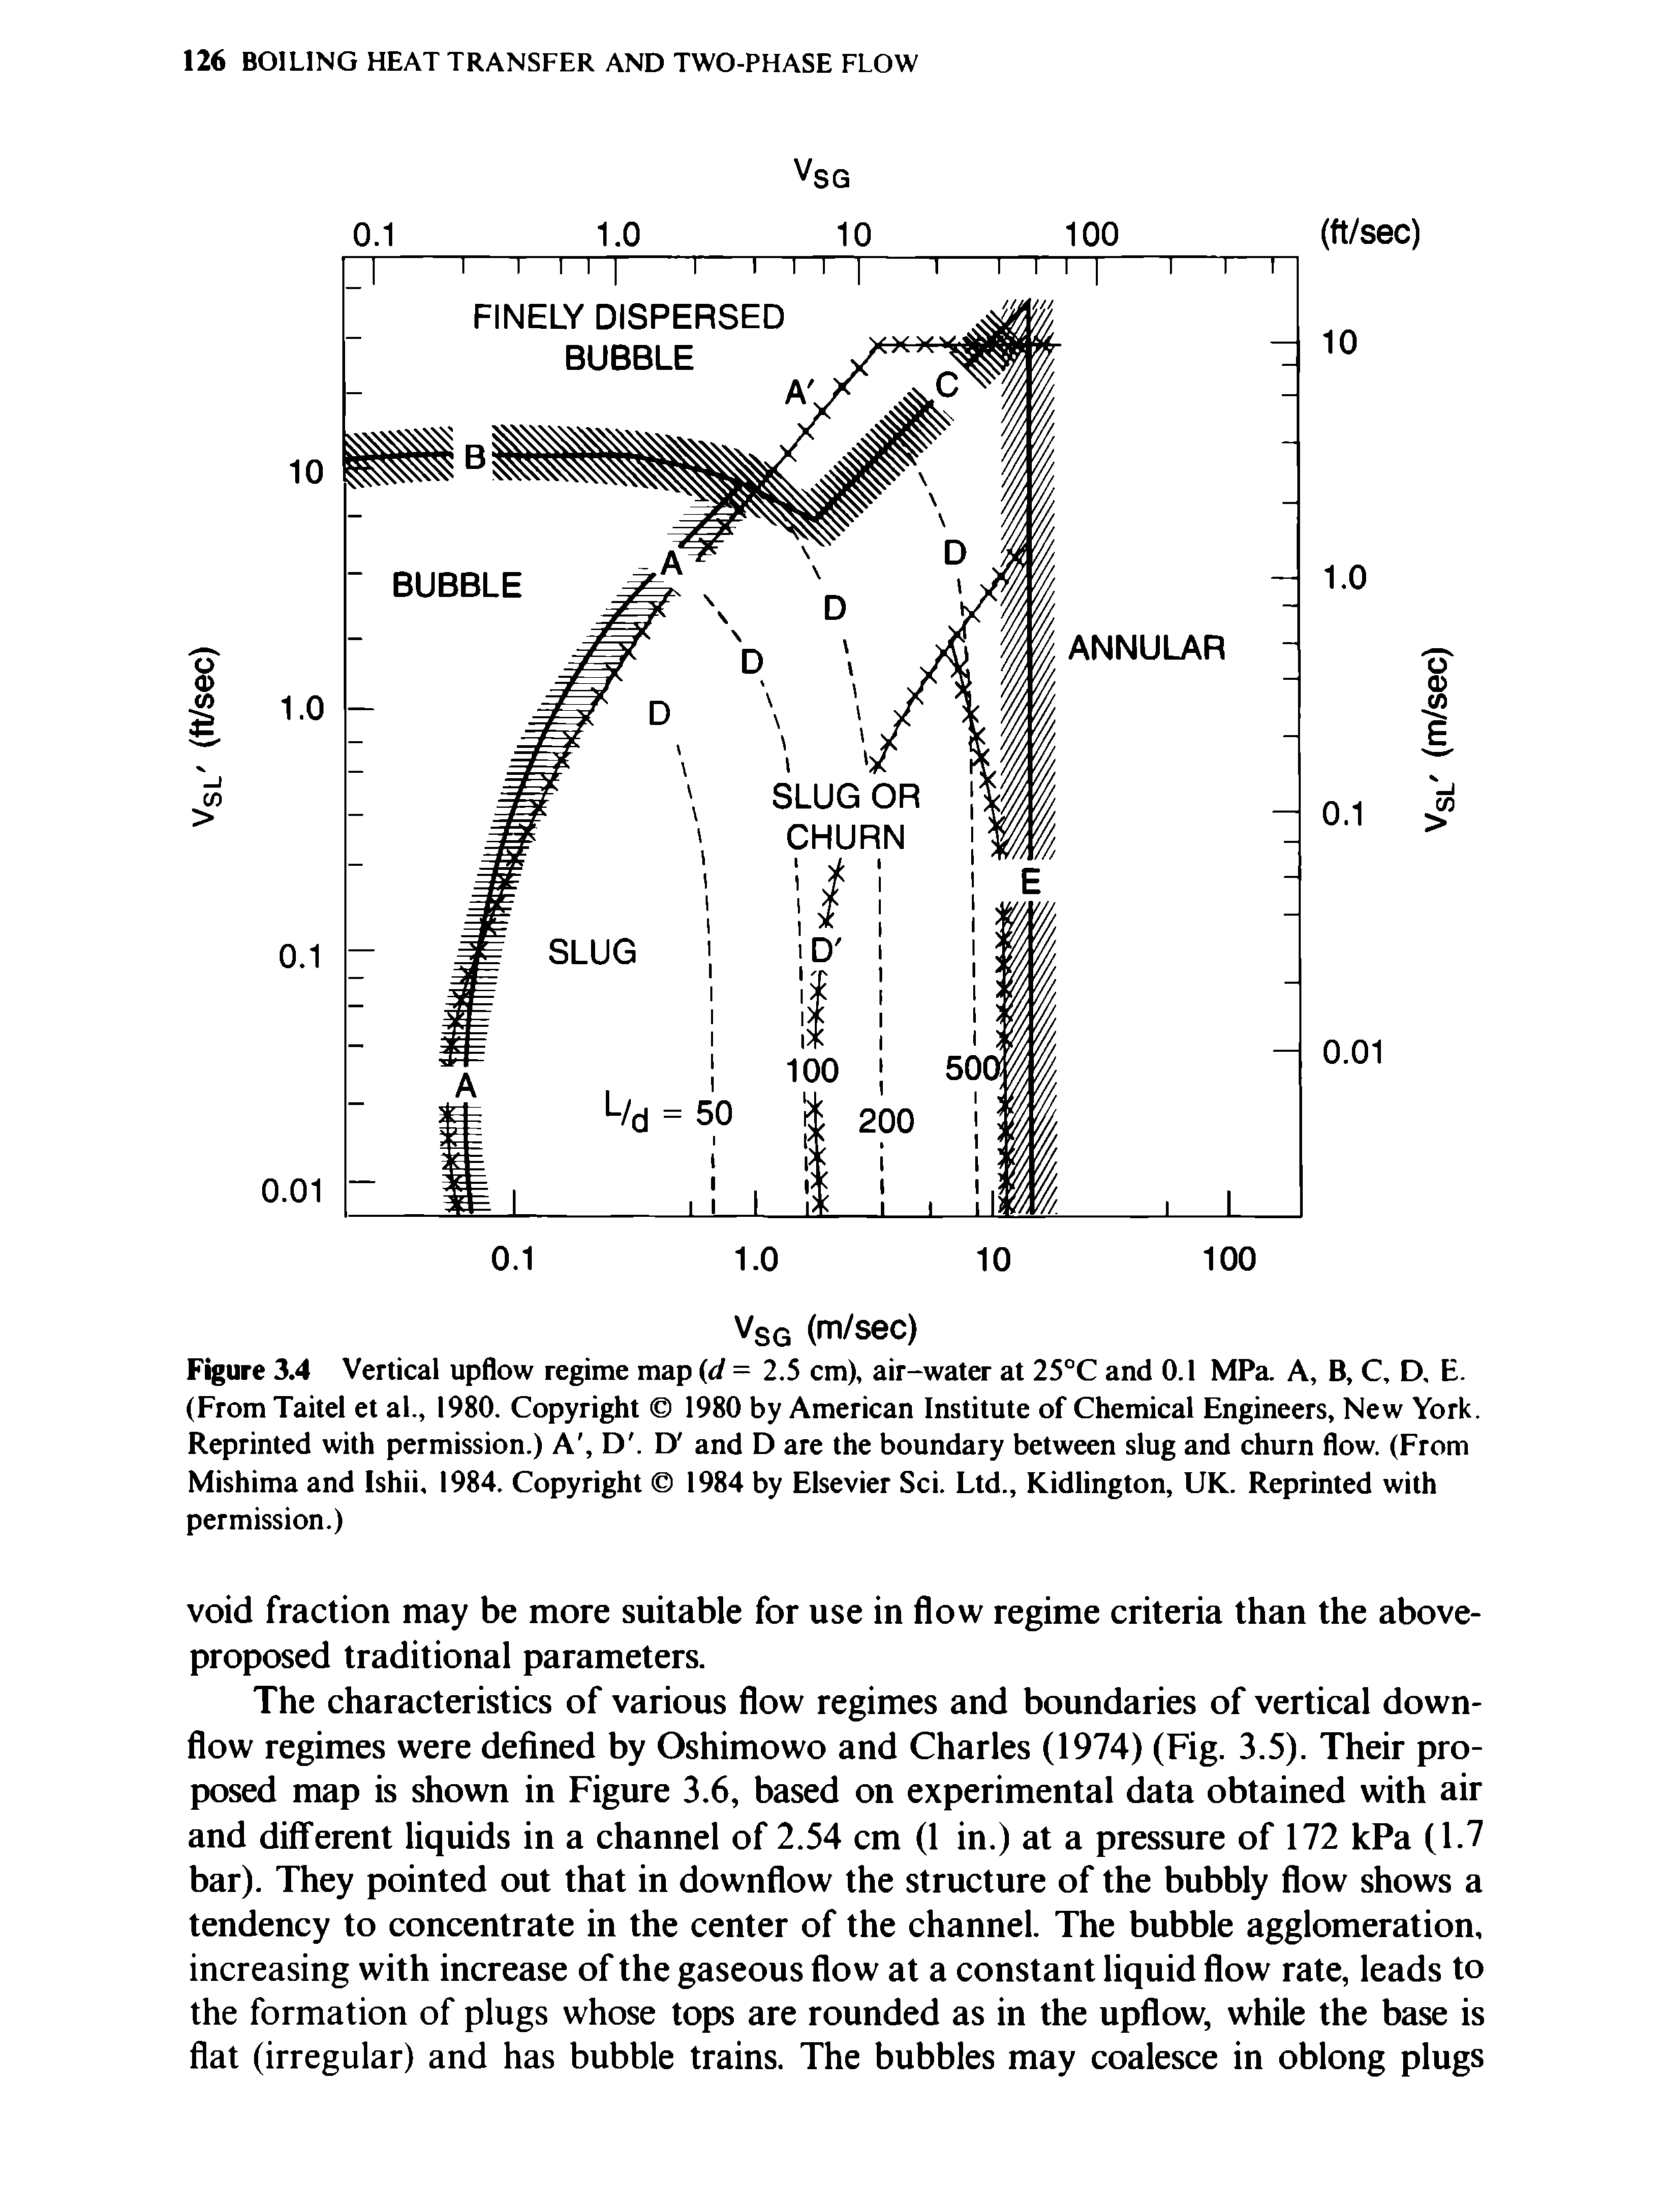 Figure 3.4 Vertical upflow regime map (d = 2.5 cm), air-water at 25°C and 0.1 MPa. A, B, C, D, E. (From Taitel et al., 1980. Copyright 1980 by American Institute of Chemical Engineers, New York. Reprinted with permission.) A, D. D and D are the boundary between slug and churn flow. (From Mishima and Ishii, 1984. Copyright 1984 by Elsevier Sci. Ltd., Kidlington, UK. Reprinted with permission.)...